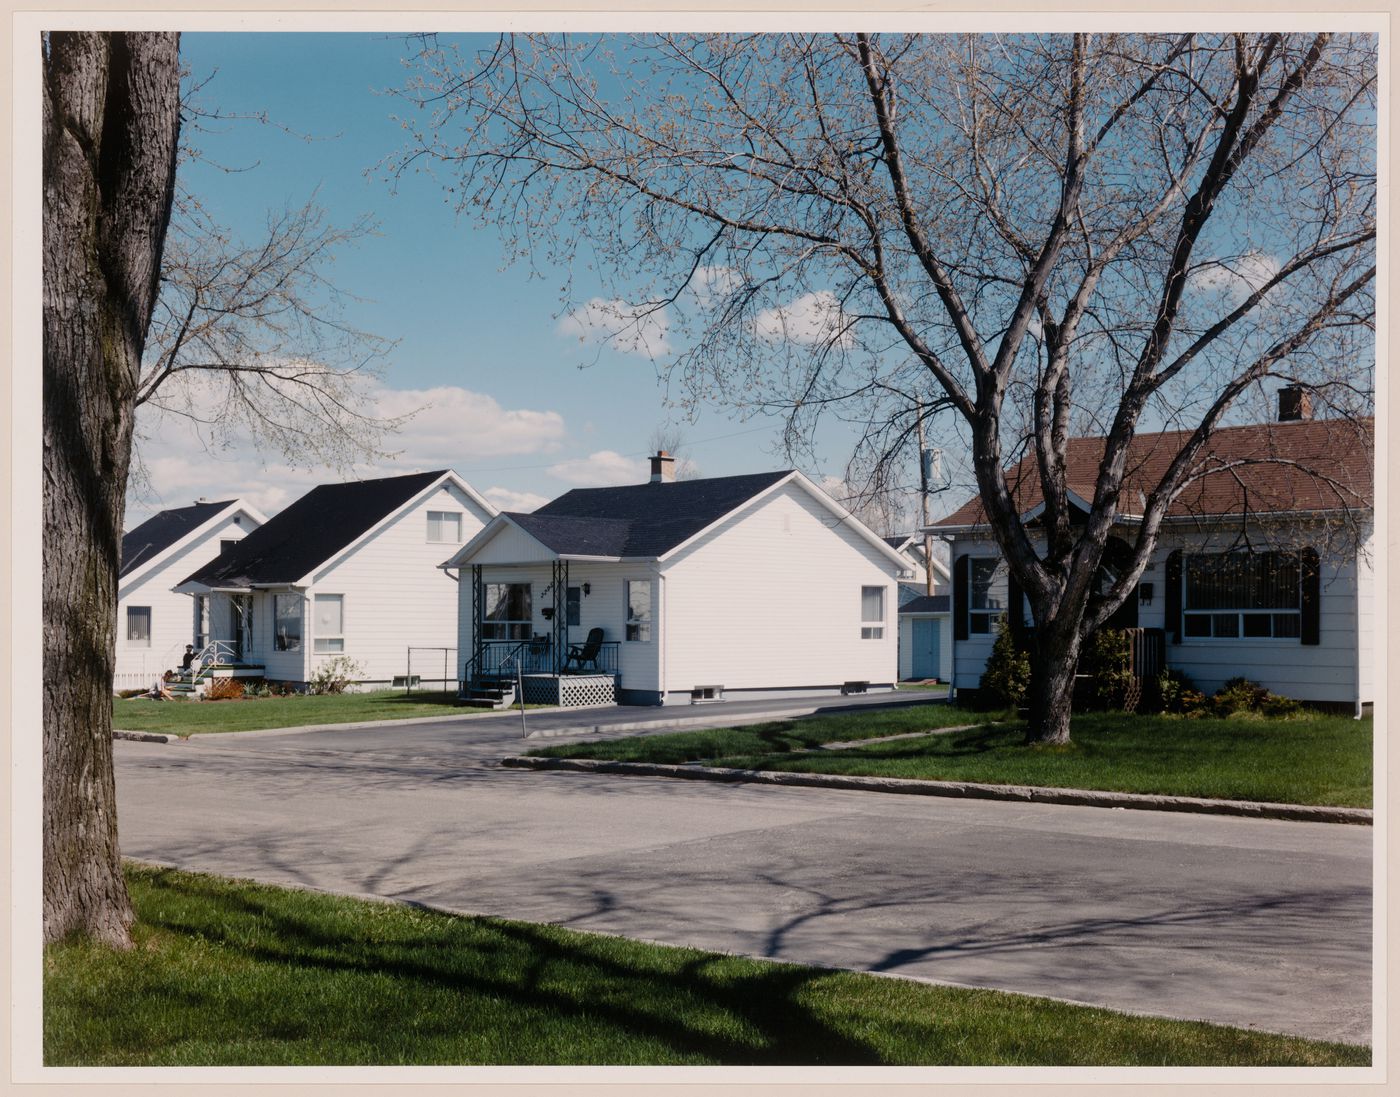 Section 2 of 2 of Panorama of workers' housing built by Wartime Housing Limited, 1941-46 rue Lamarche at rue Poitras looking northwest, Arvida, Quebec